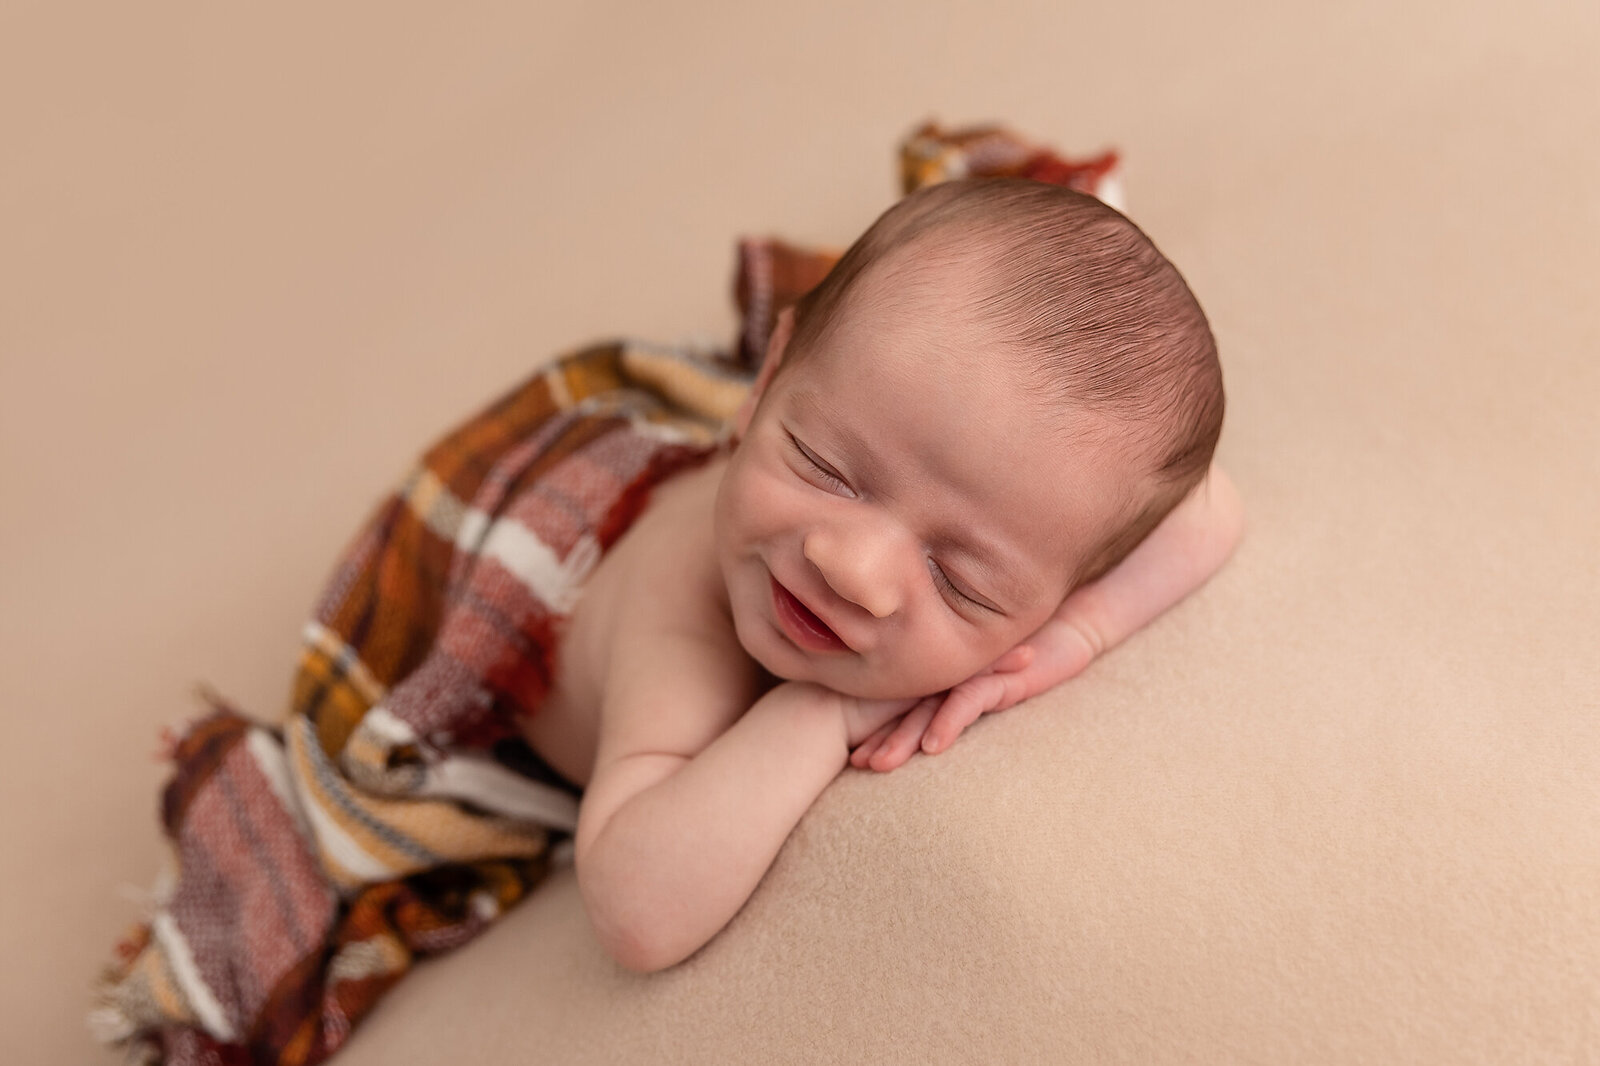 baby smiling while sleeping by Newborn Photography Bucks County PA